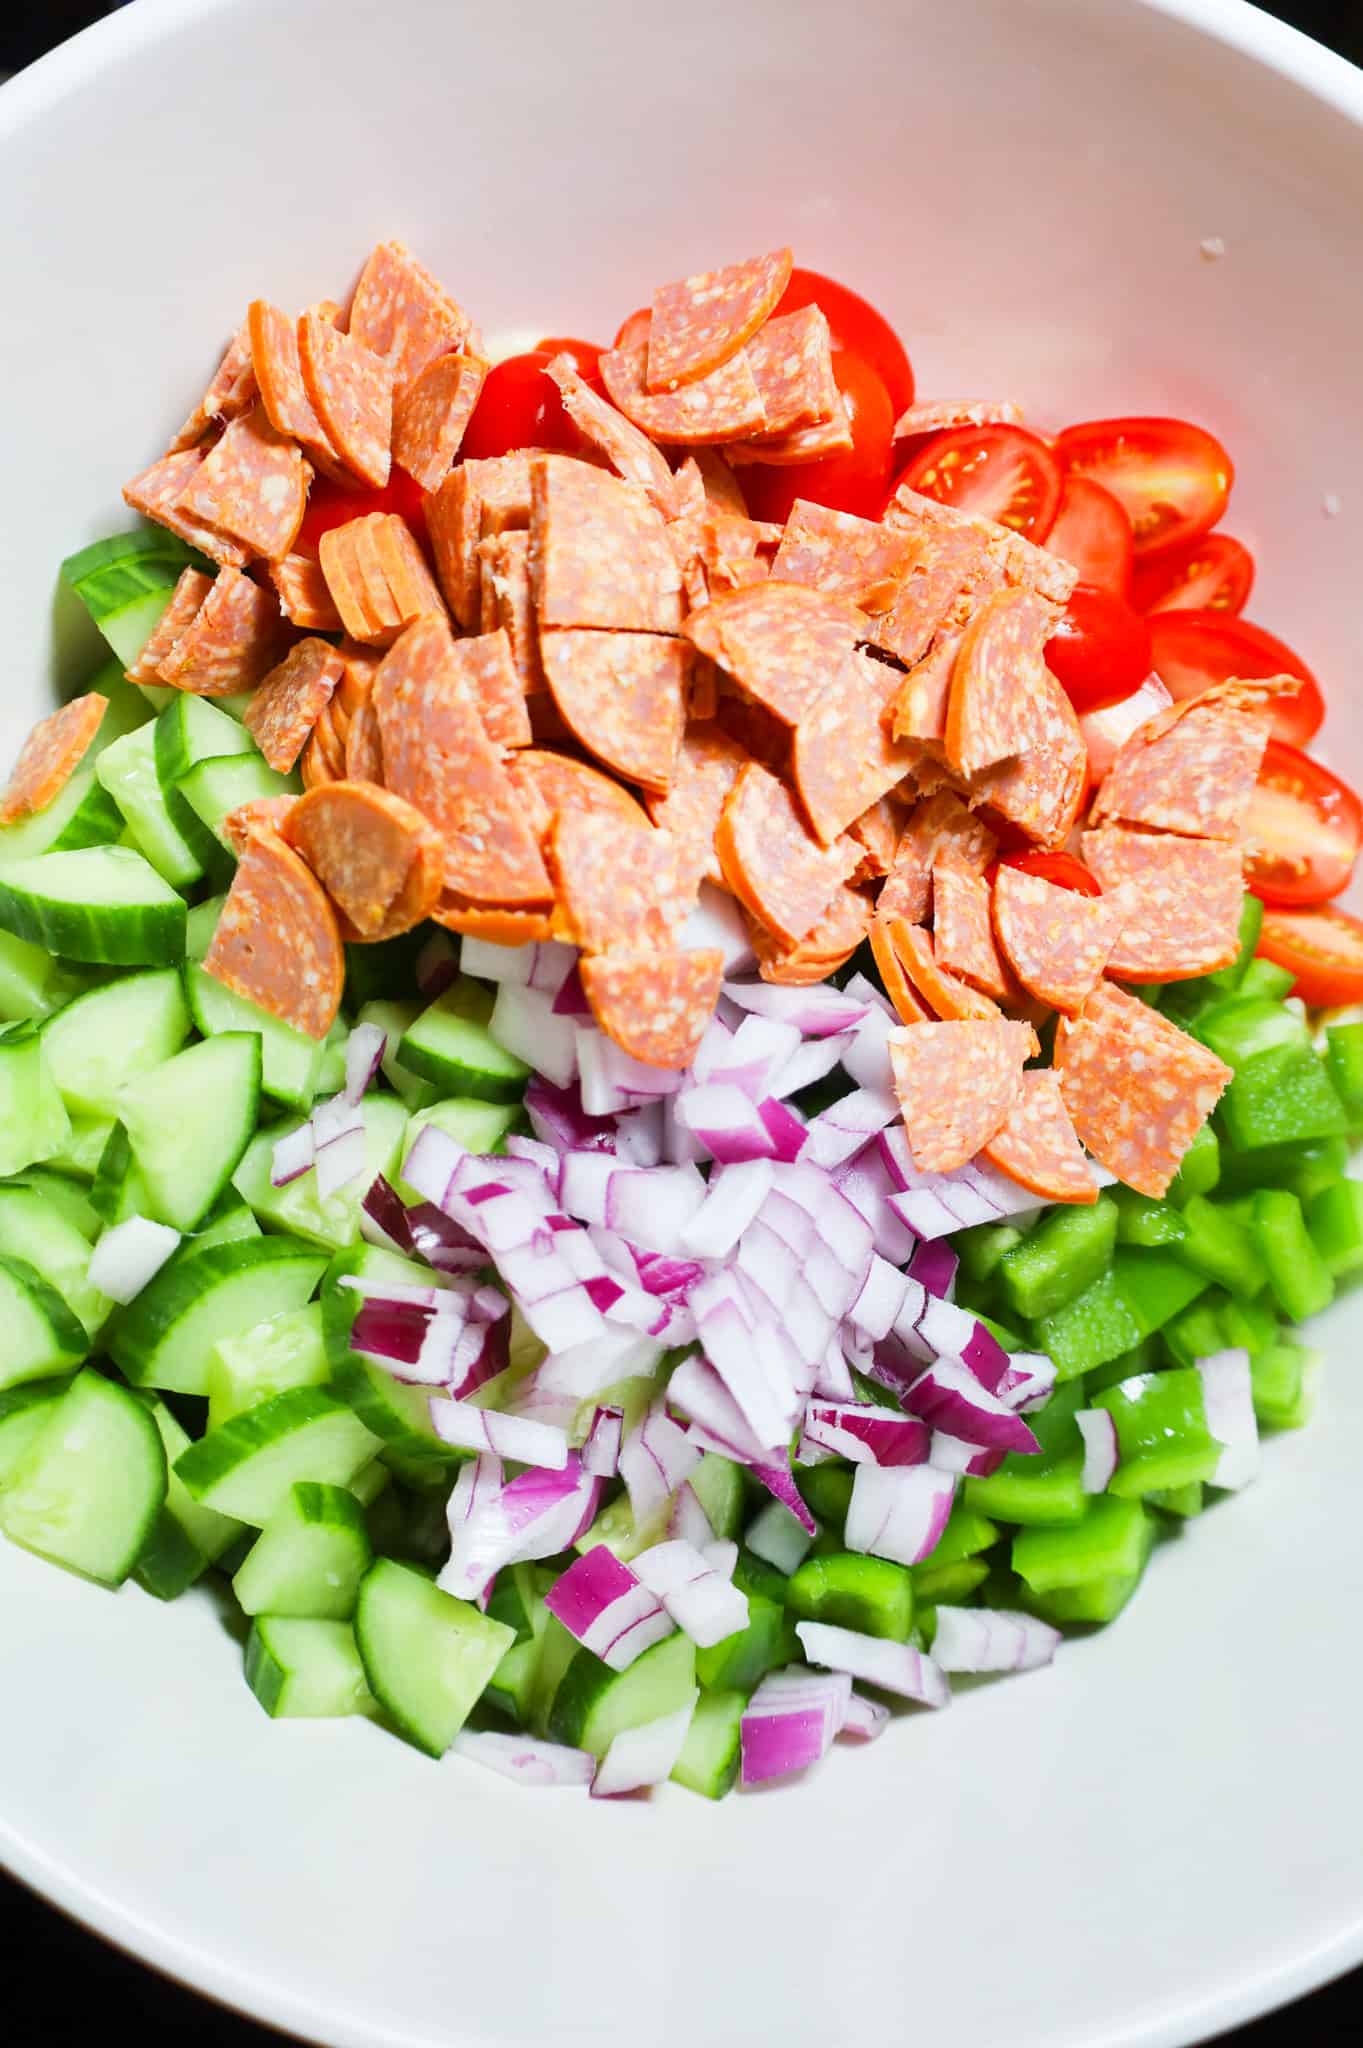 chopped pepperoni, diced red onions, diced cucumbers, diced green peppers and halved grape tomatoes in a mixing bowl